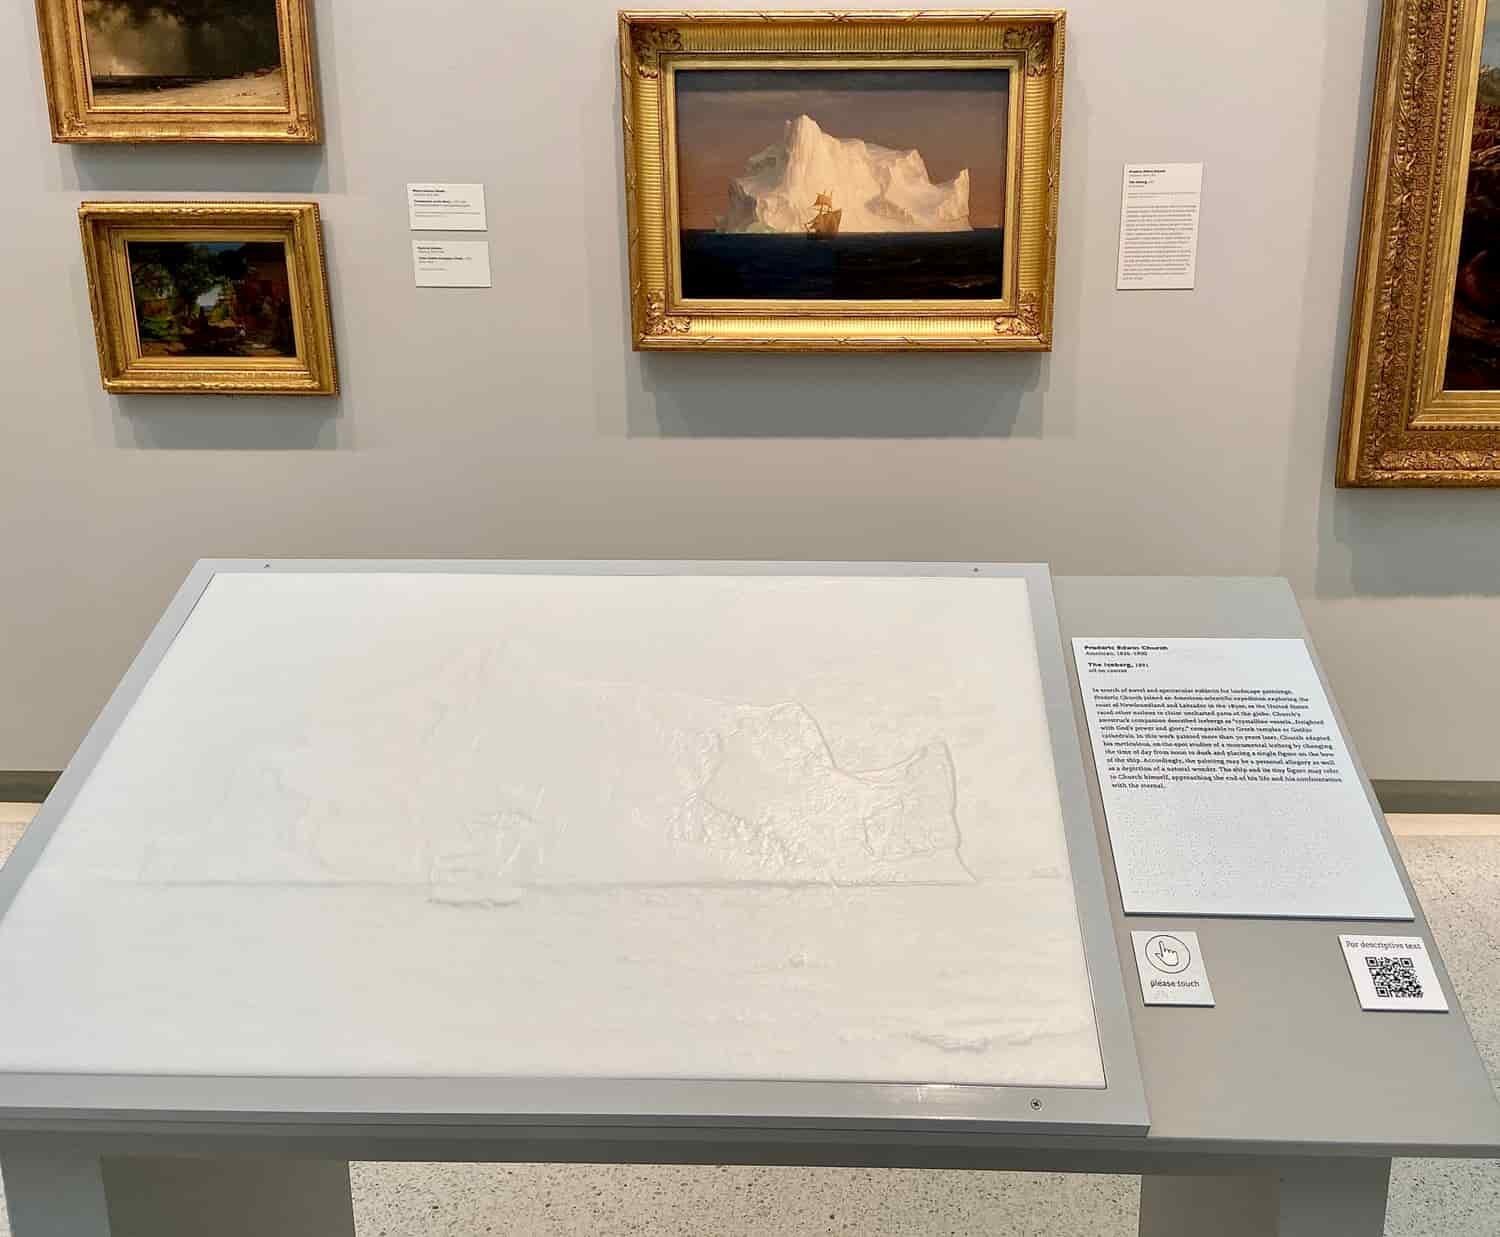  The Carnegie Museum of Art aims to make artworks accessible to everyone. Here, a tactile replica of the painting hanging on the wall can be seen. The replicas encourage people with visual impairments to engage with art. 